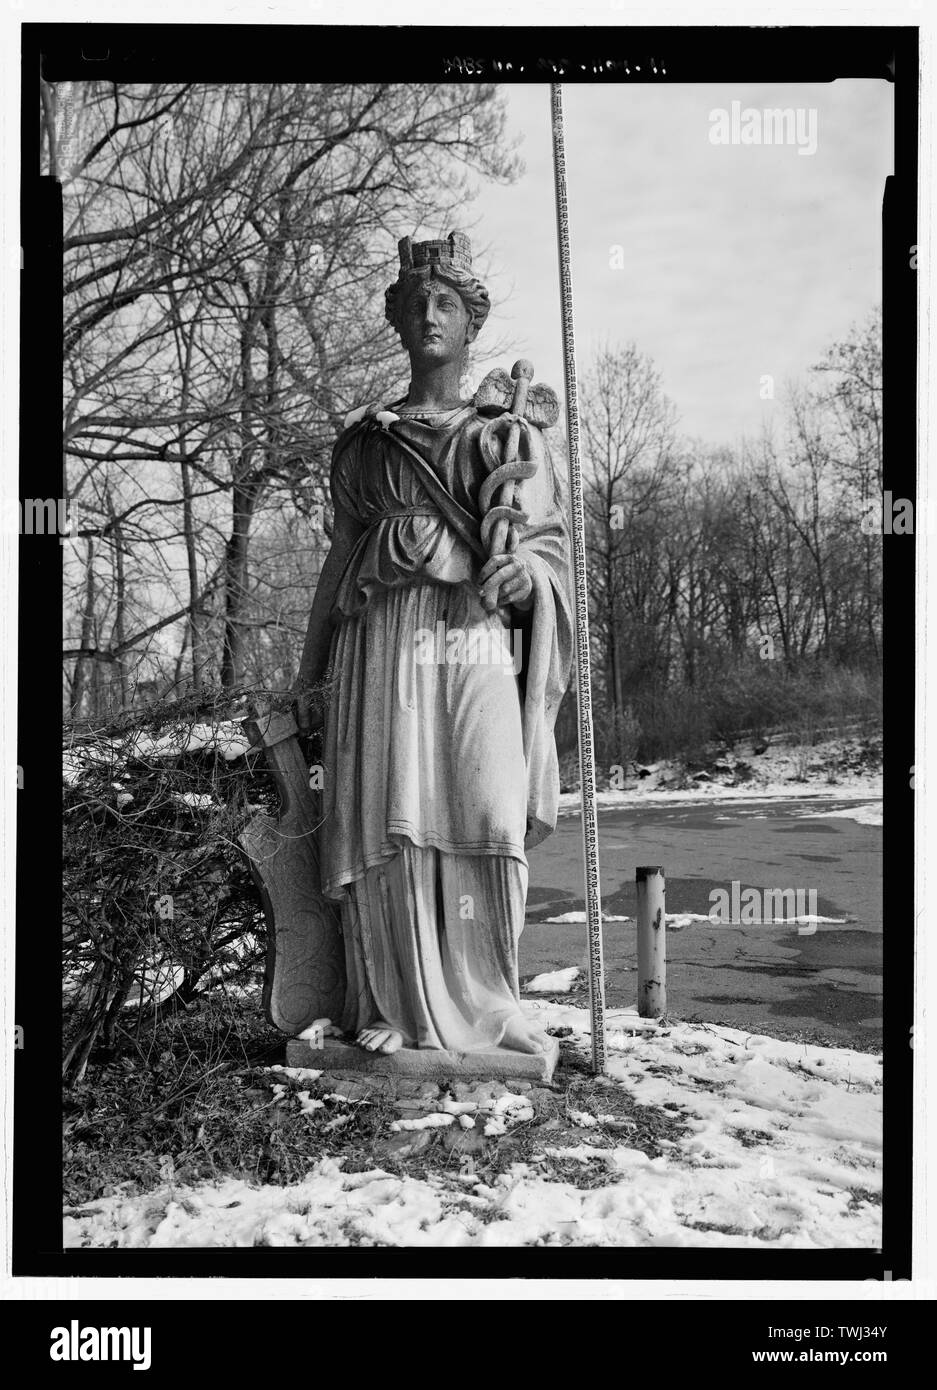 Sculpture, Minerva, with scale - National Park Seminary, Bounded by Capitol Beltway (I-495), Linden Lane, Woodstove Avenue, and Smith Drive, Silver Spring, Montgomery County, MD; U.S.Department of the Army; Ray, Arthur; Cassedy, John Irving, A; Ament, James E; Davis, Roy Tasco; Holman, Emily Elizabeth; Schneider, Thomas Franklin; Rosenthal, James, field team; Price, Virginia B, transmitter; Ott, Cynthia, historian; Boucher, Jack E, photographer; Lavoie, Catherine C, project manager; Price, Virginia B, transmitter; Price, Virginia B, transmitter Stock Photo